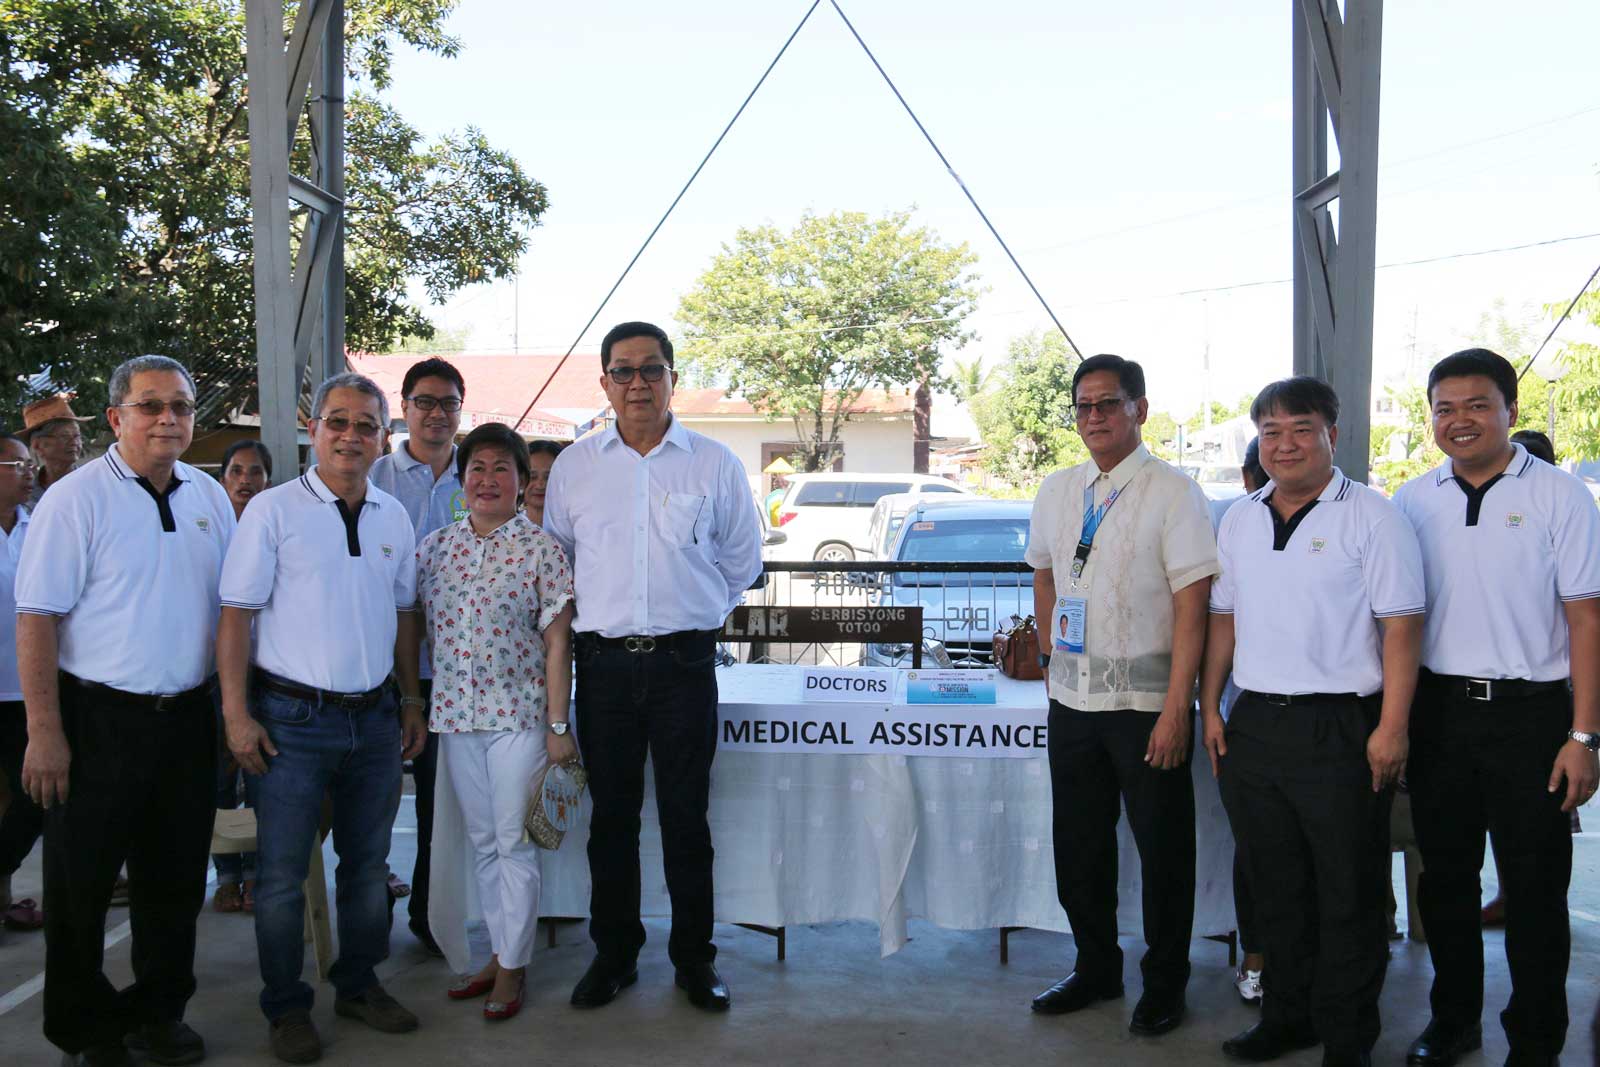 CPF Philippines arranged the Medical and Dental Mission Project for the 2nd year